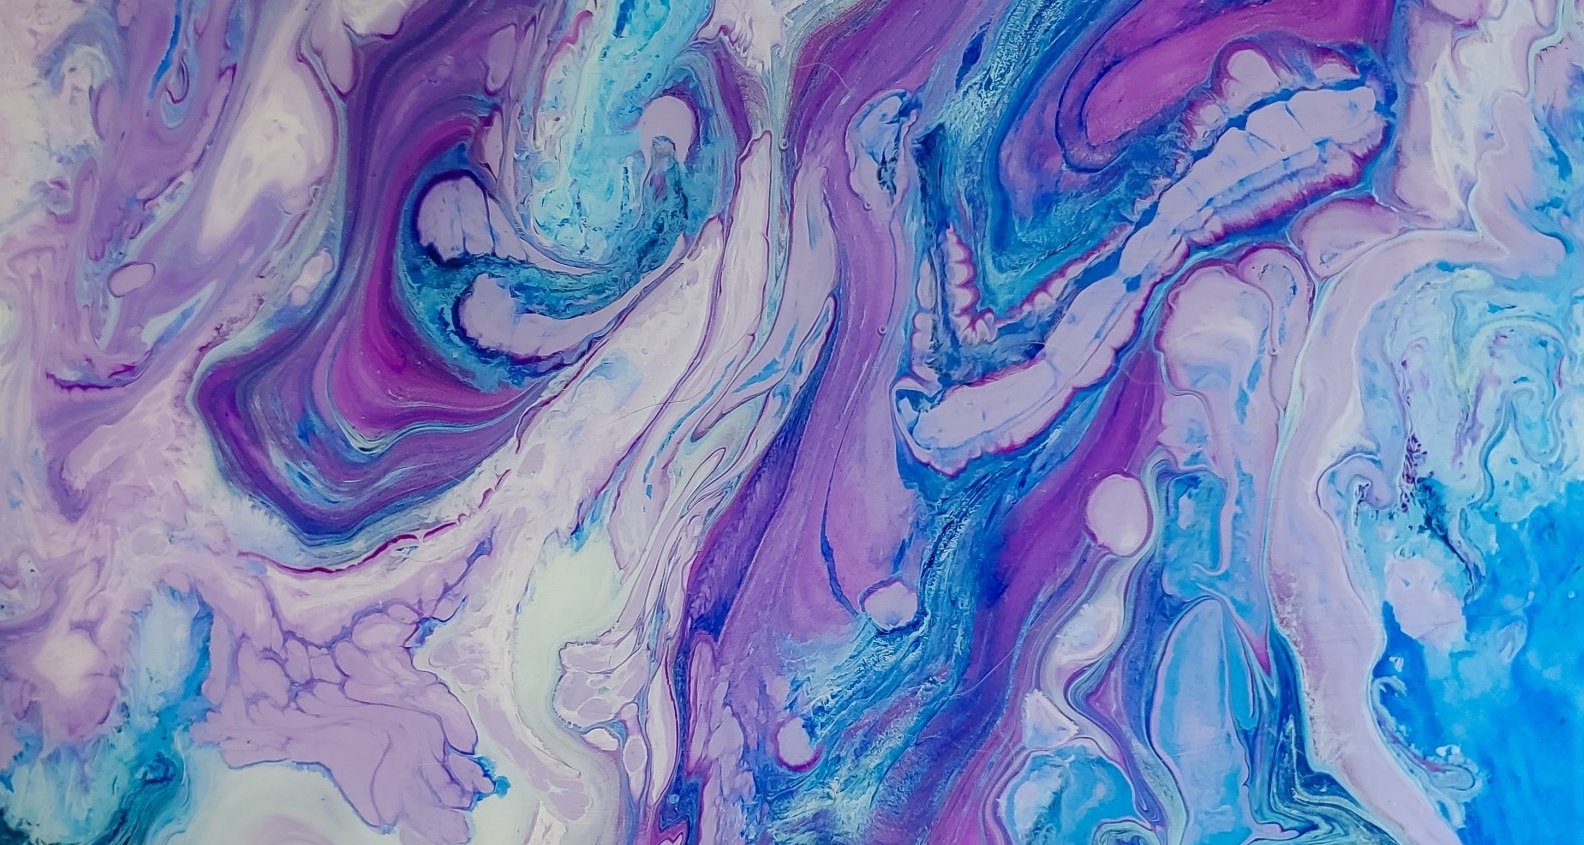 Up close view of the gem opal and its blue, purple, and white swirled colors